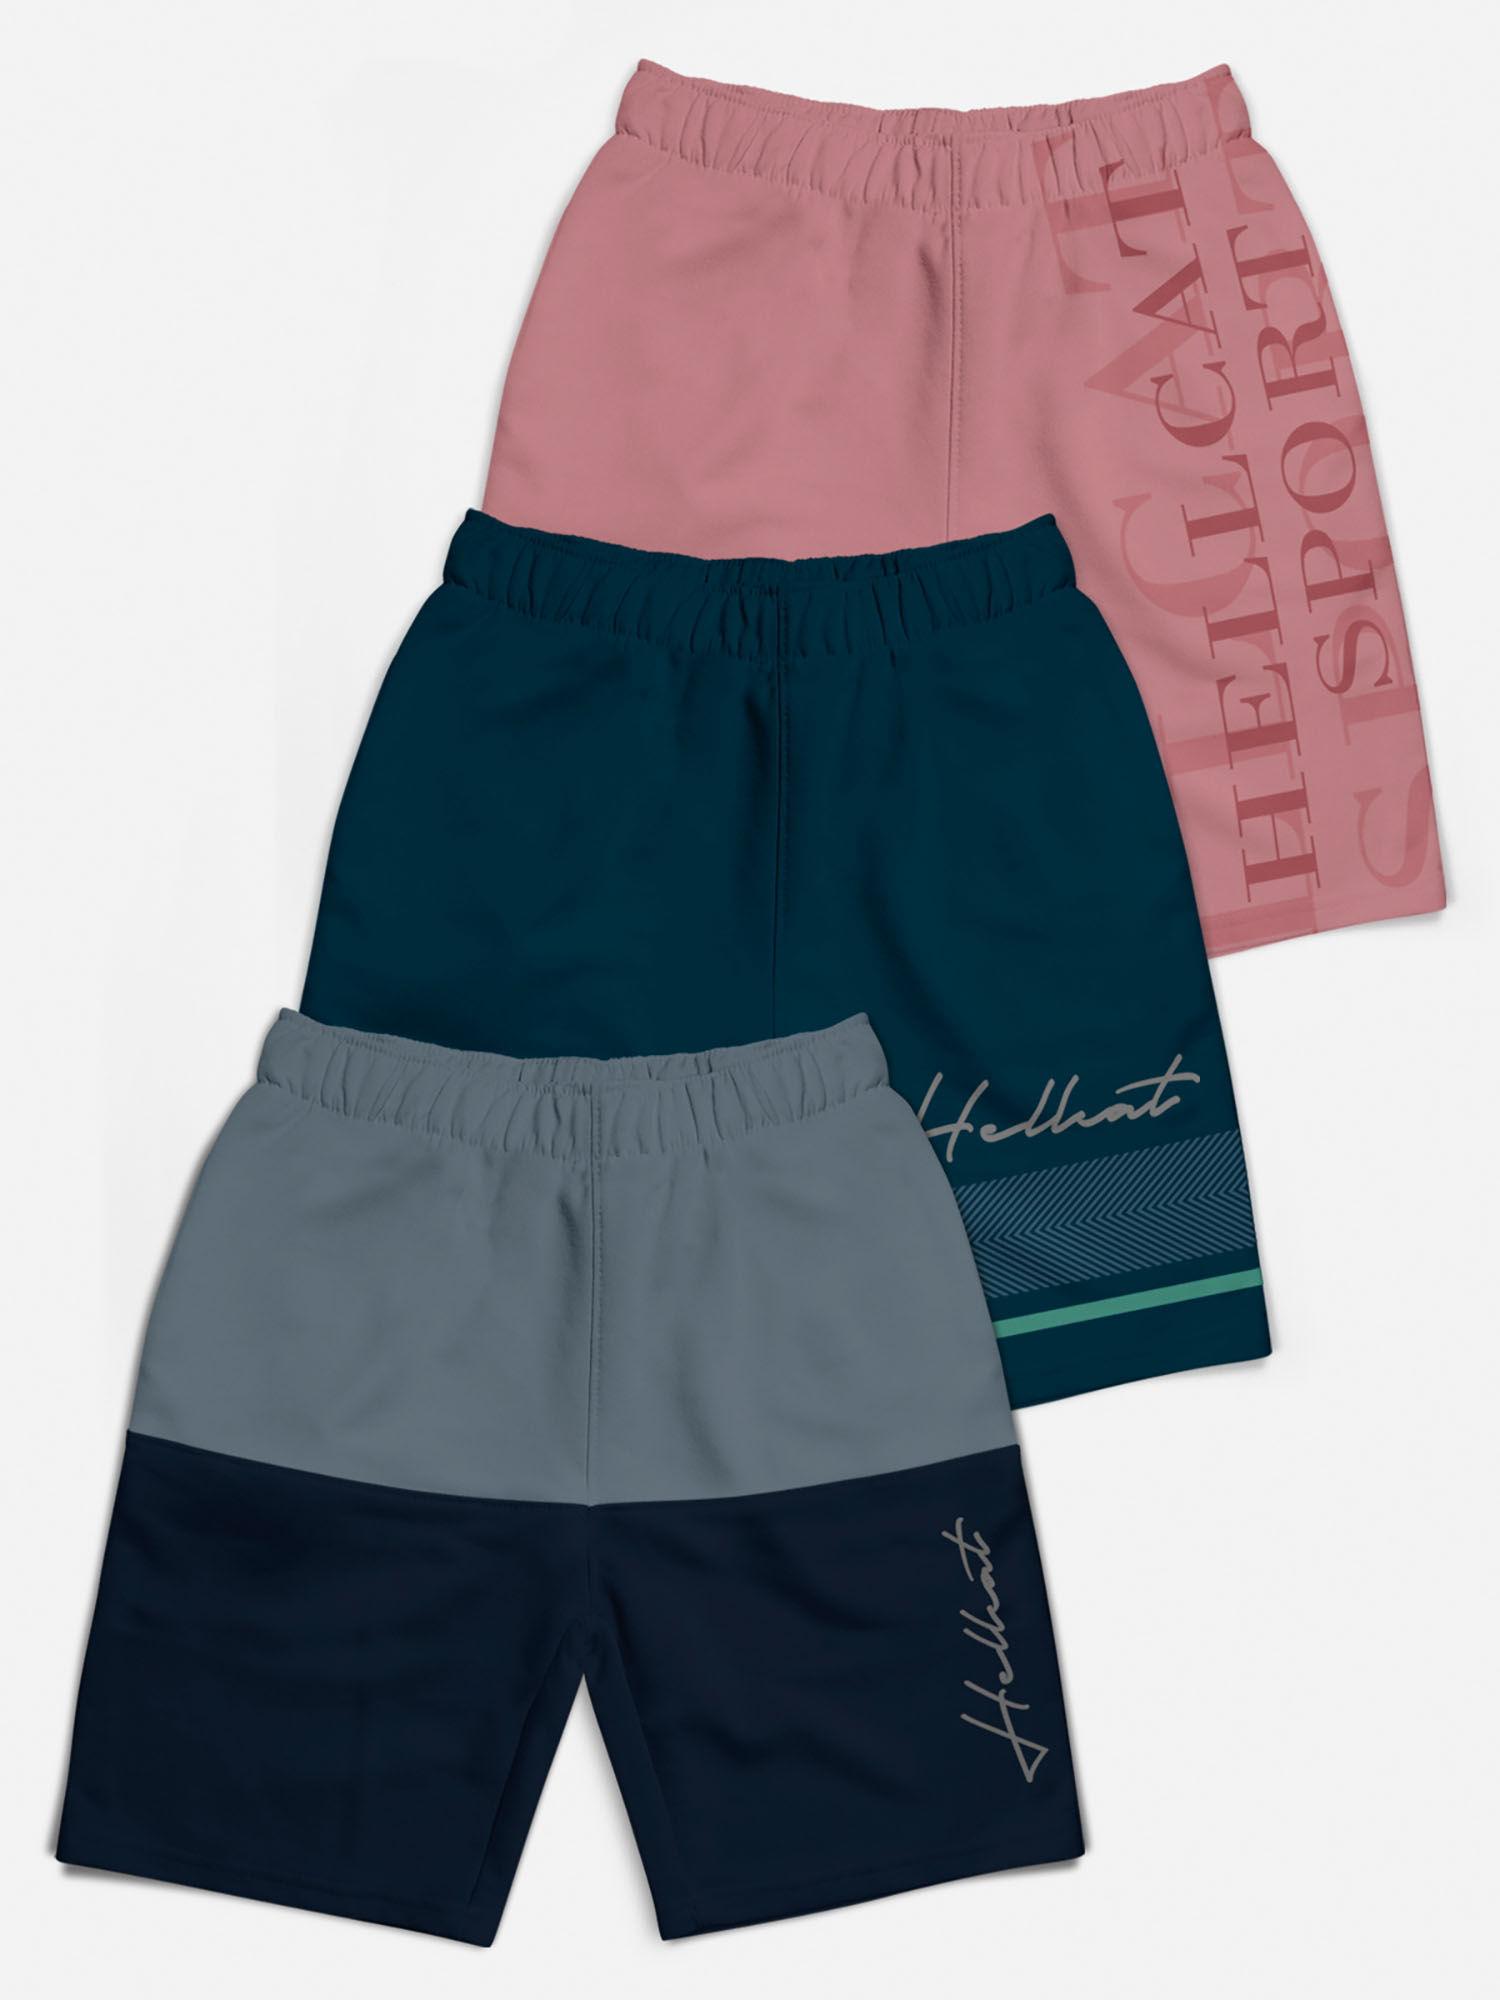 multi-color mid rise colorblock shorts for girls (pack of 3)